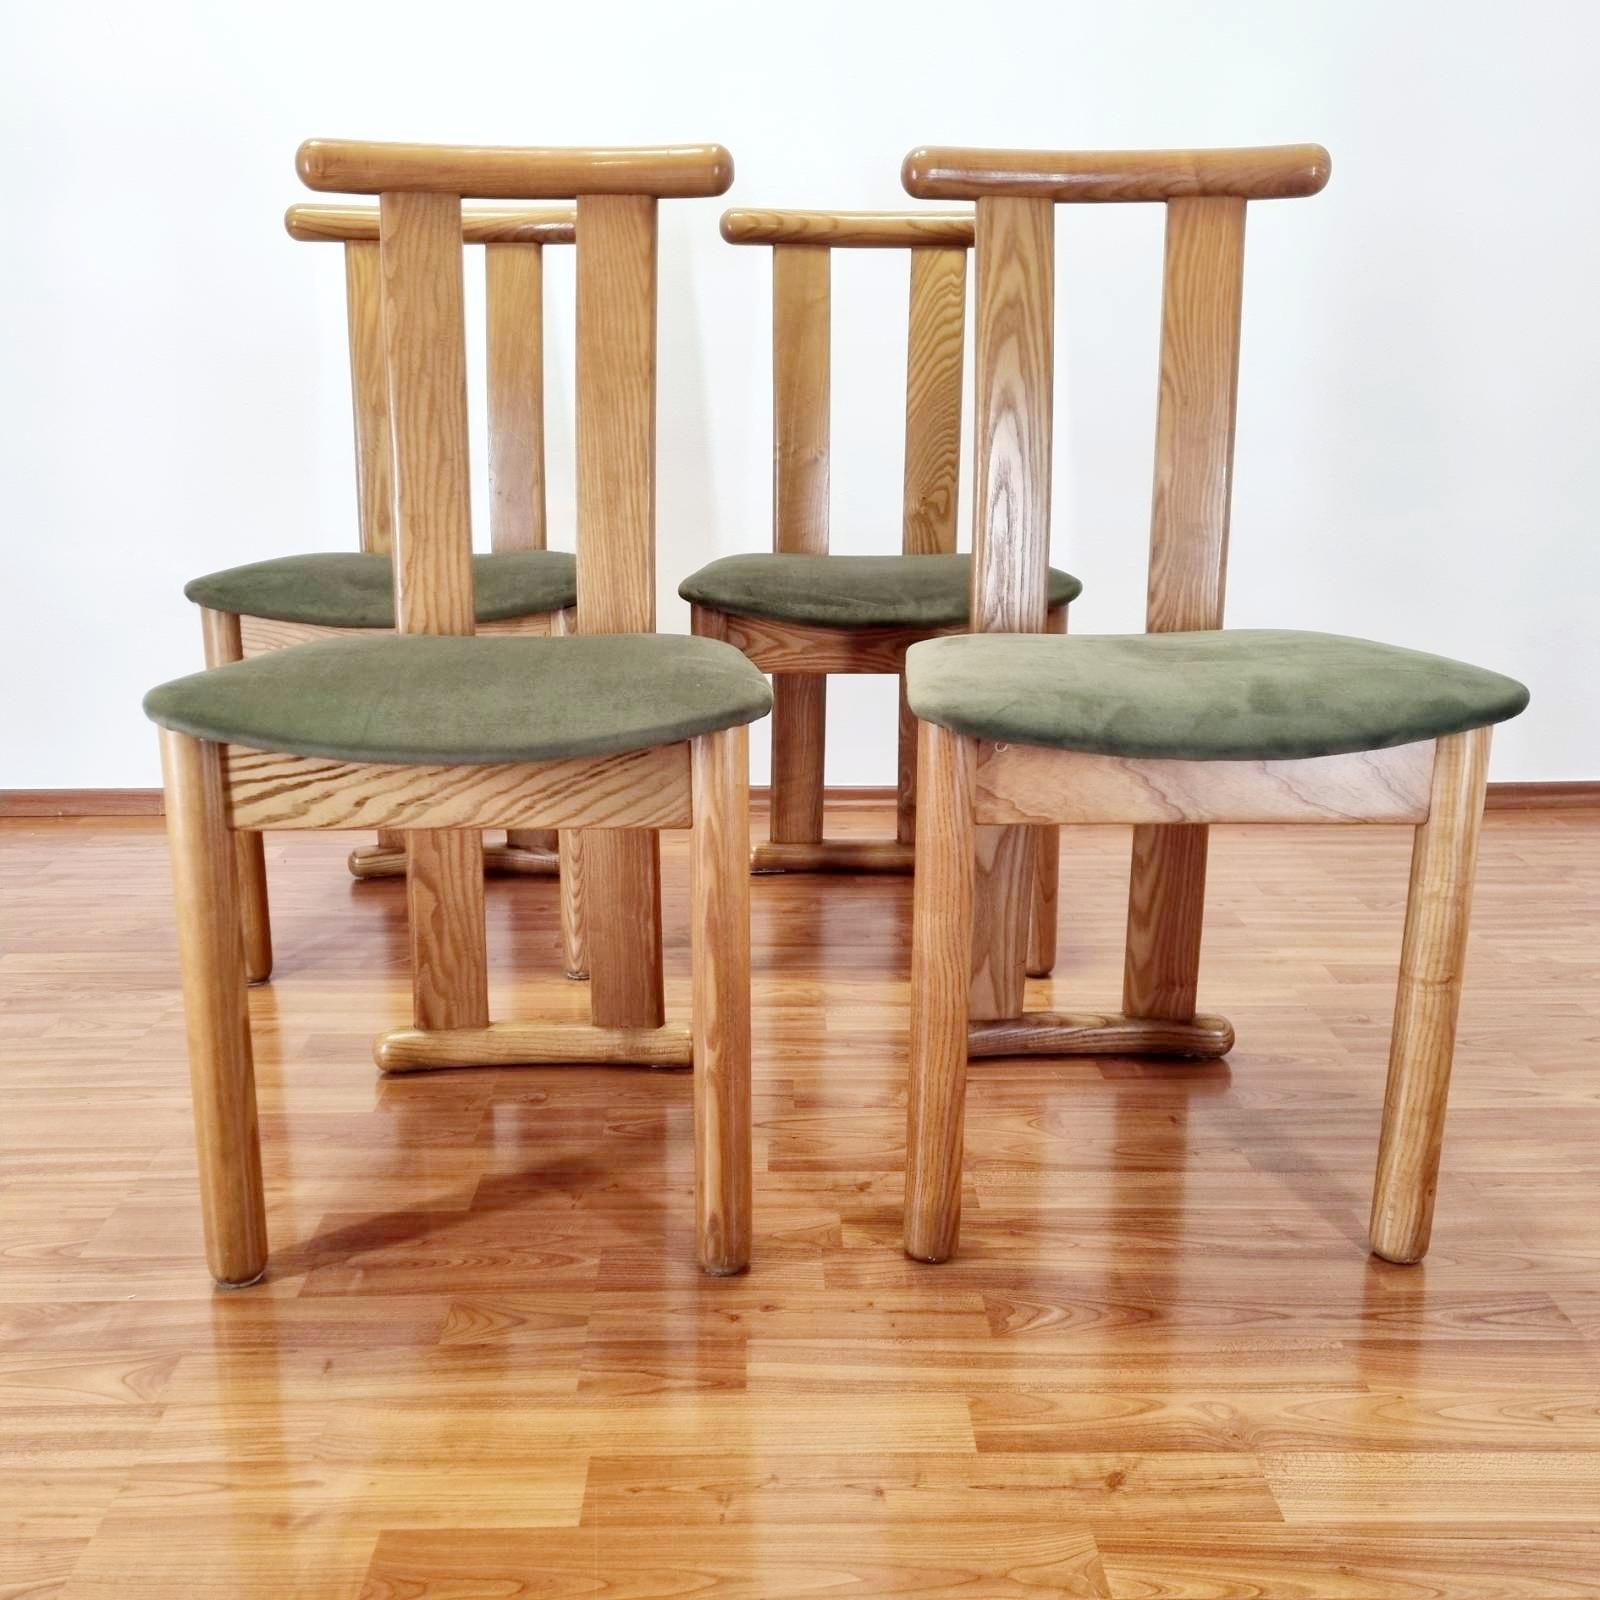 Set of 4 rare Italian dinning chairs. Made in the late 80s.
They are in good vintage condition, with traces of use on the wood. The seating areas were recently reupholsted.